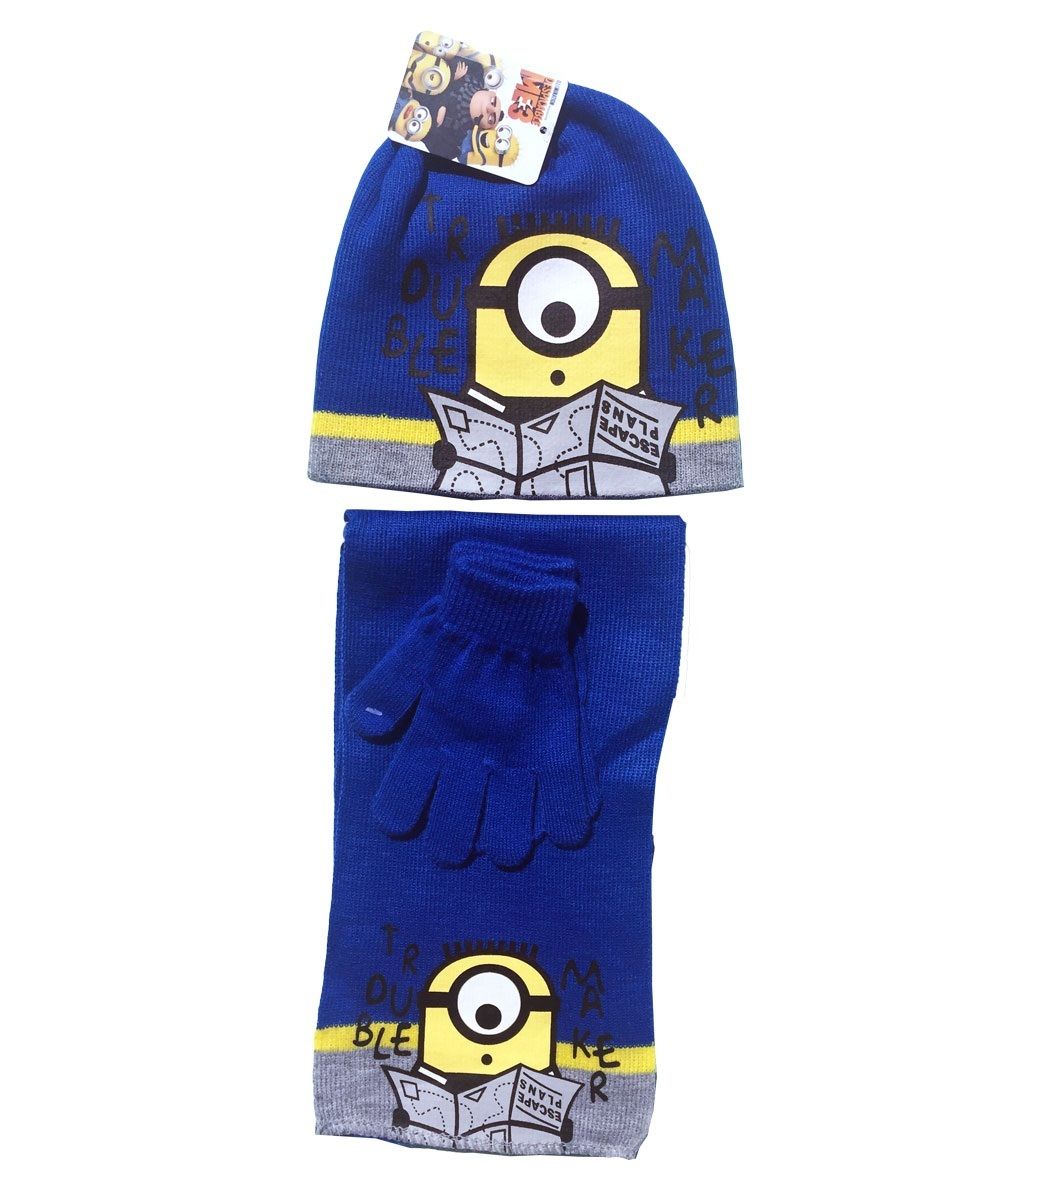 Minions Set, hat, pair of gloves and a scarf